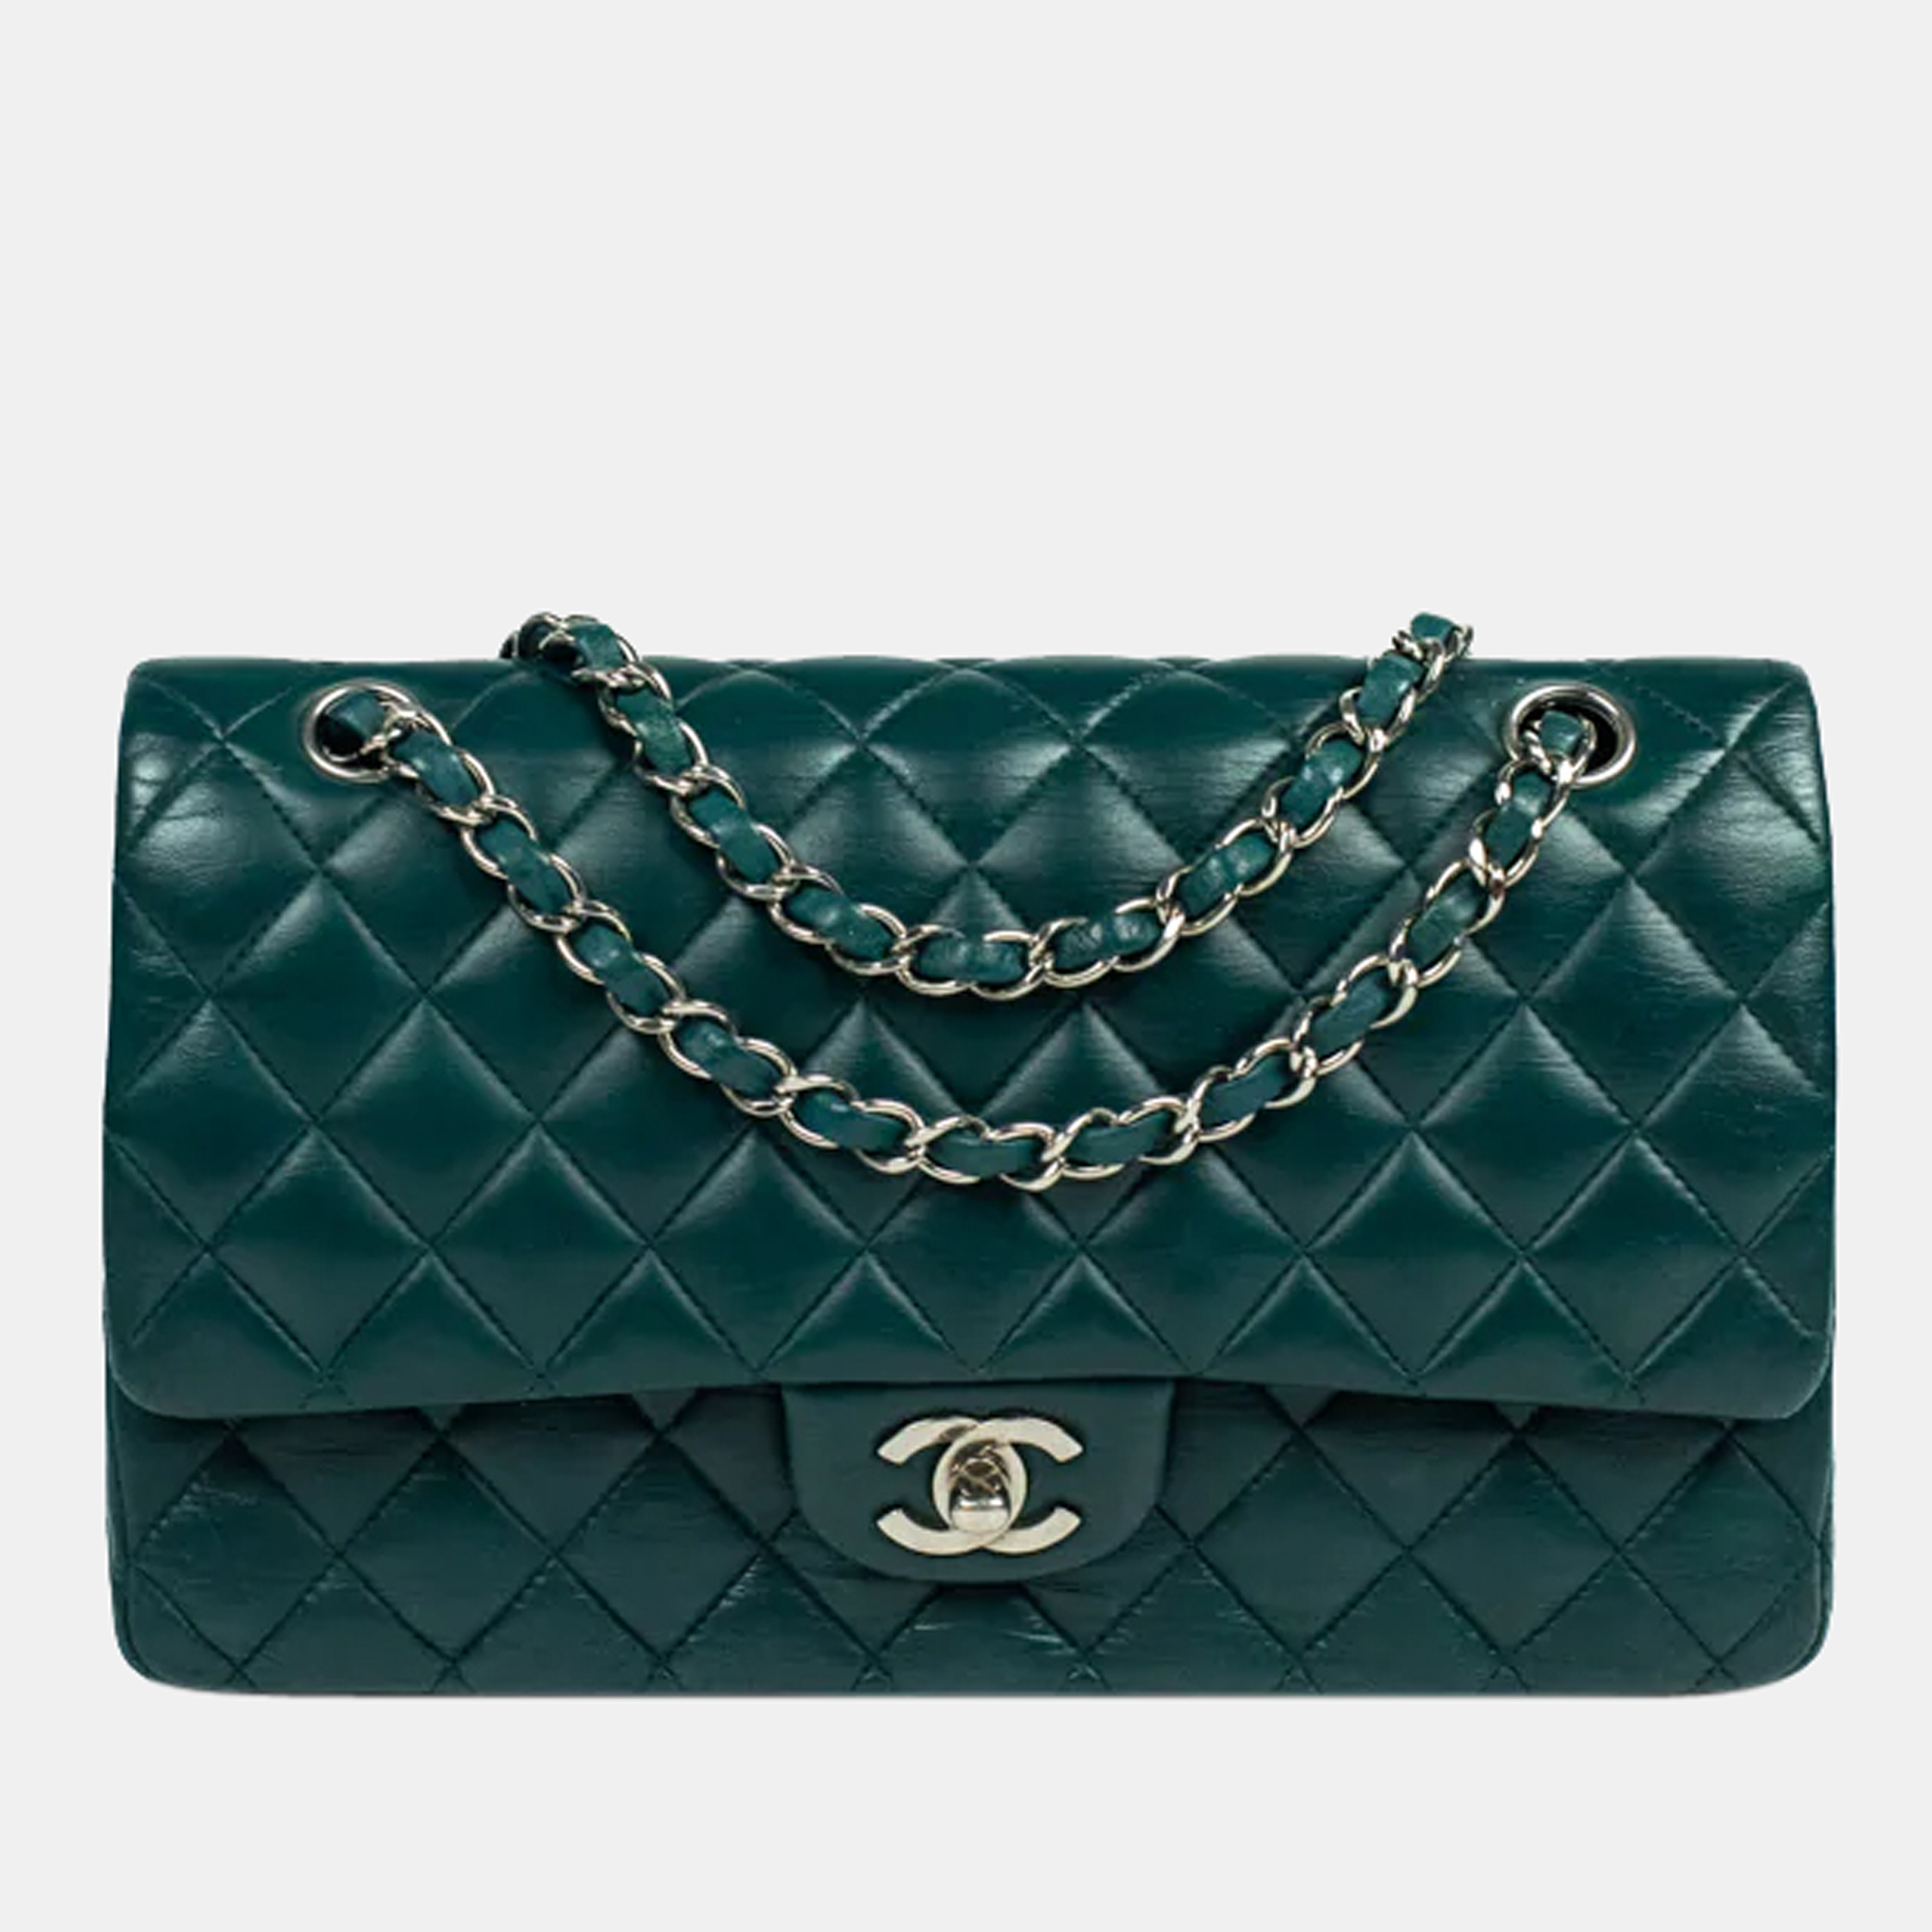 Pre-owned Chanel Green Leather Medium Classic Double Flap Shoulder Bag